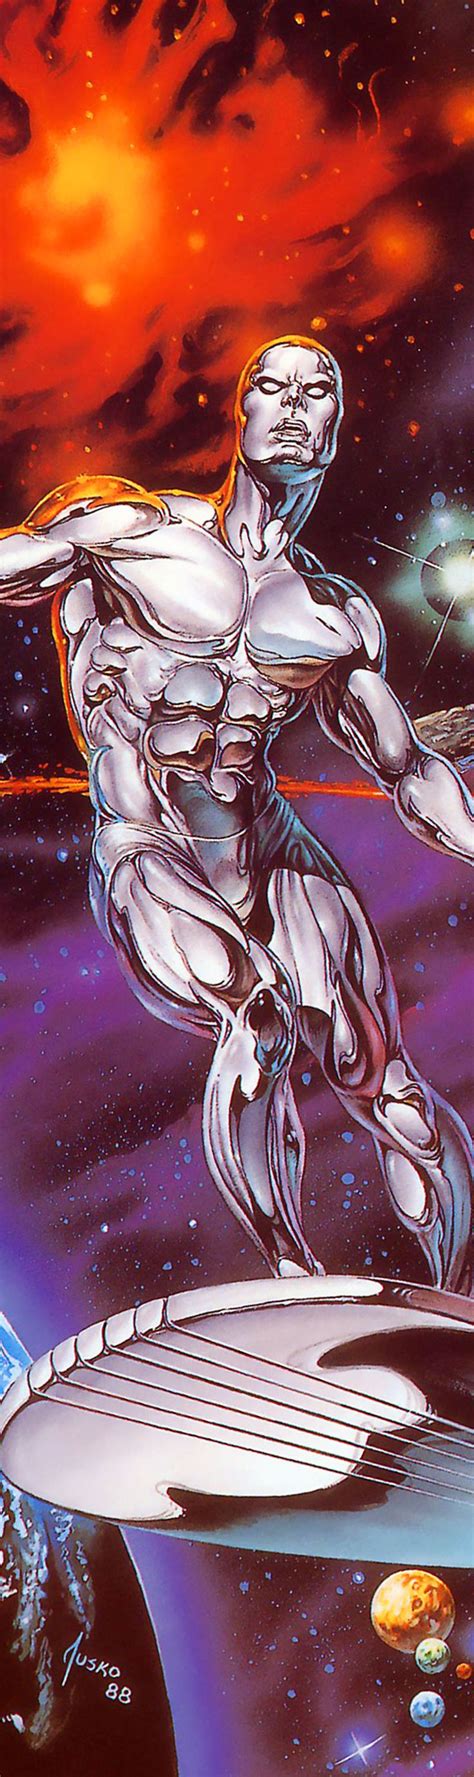 93 Best Images About Silver Surfer On Pinterest Silver